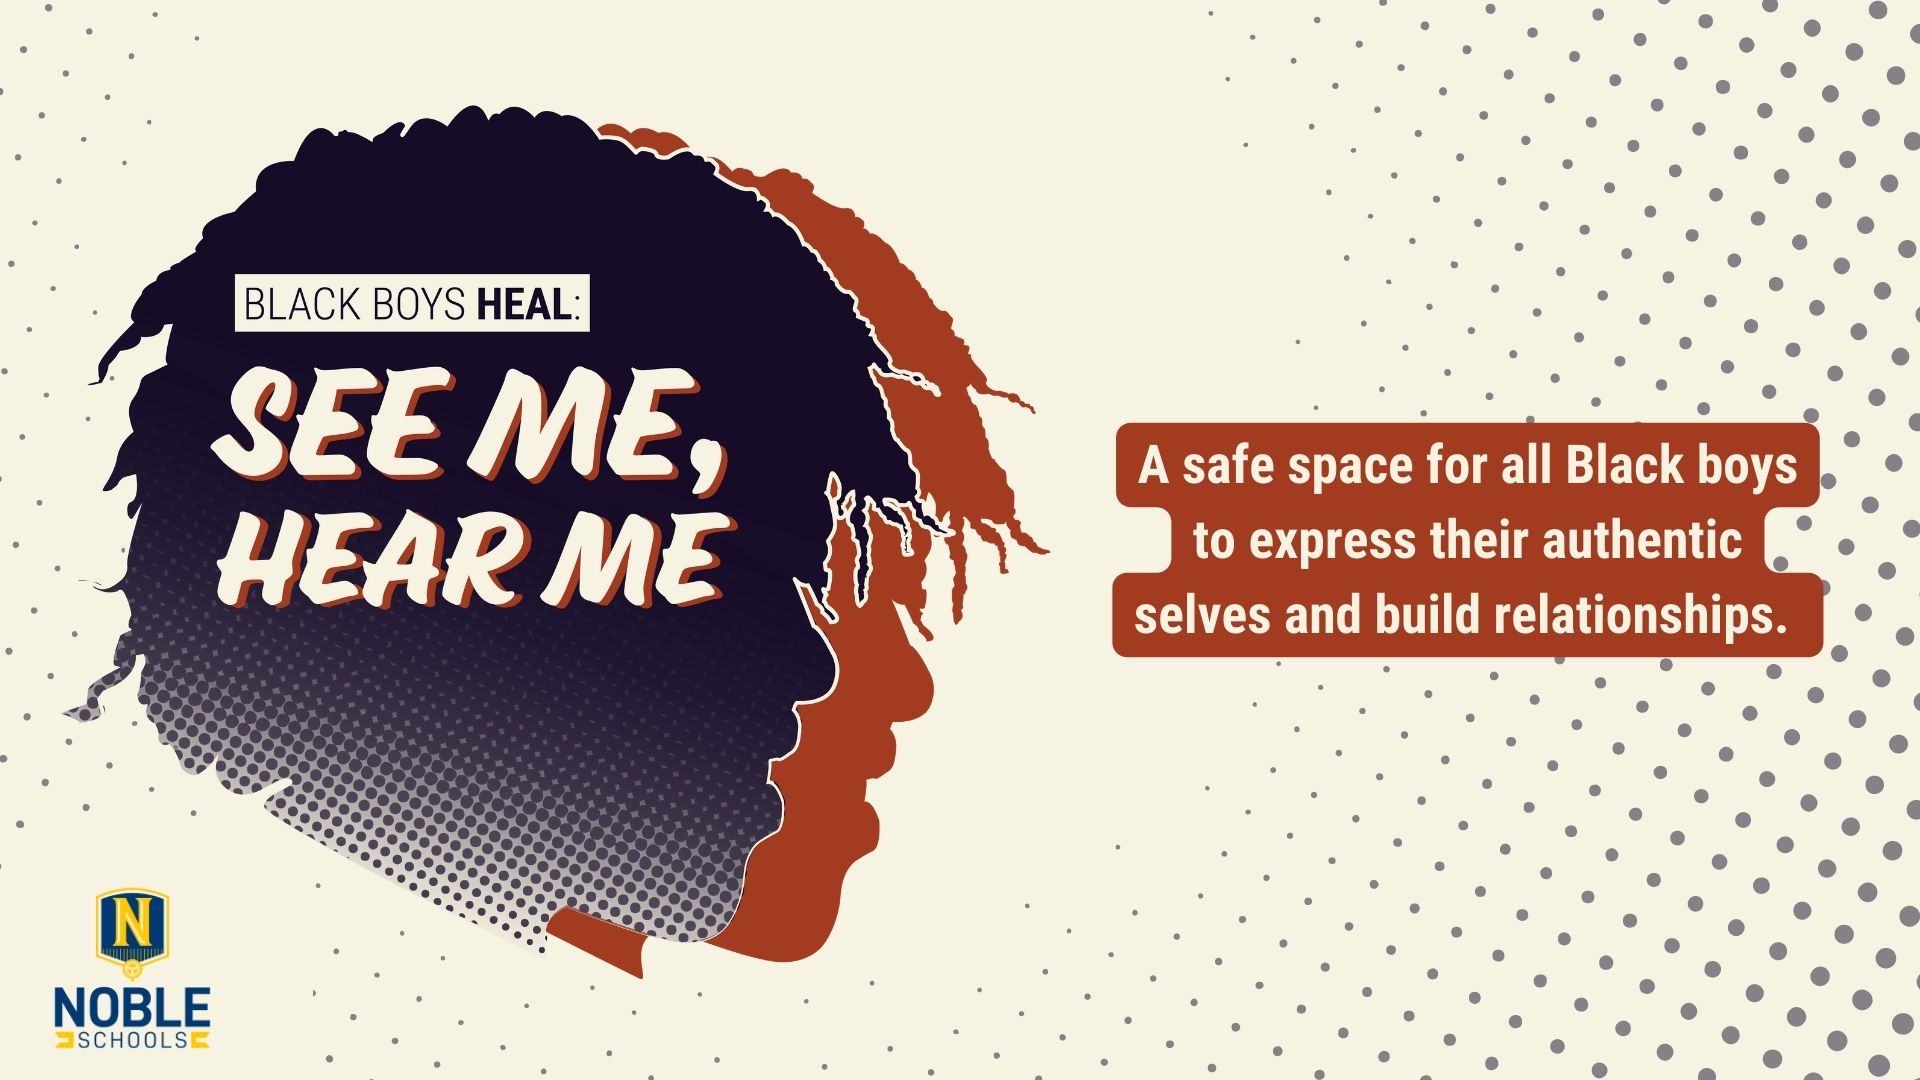 On the left of this graphic, there are two of the same silhouetted head with locs overlapping each other. The top one is dark blue and the bottom one, shadowing it to the right, is a burnt reddish-orange. On top of the head, there is white cream text that reads "Black Boys Heal: See Me, Hear Me". To the right of the heads, there is white cream text on a burnt reddish-brown background that reads "A safe space for all Black boys to express their authentic selves and build relationships." The Noble Schools logo is in the bottom left corner. The background is a cream white color with comic-book-like dark blue dots on the edges.